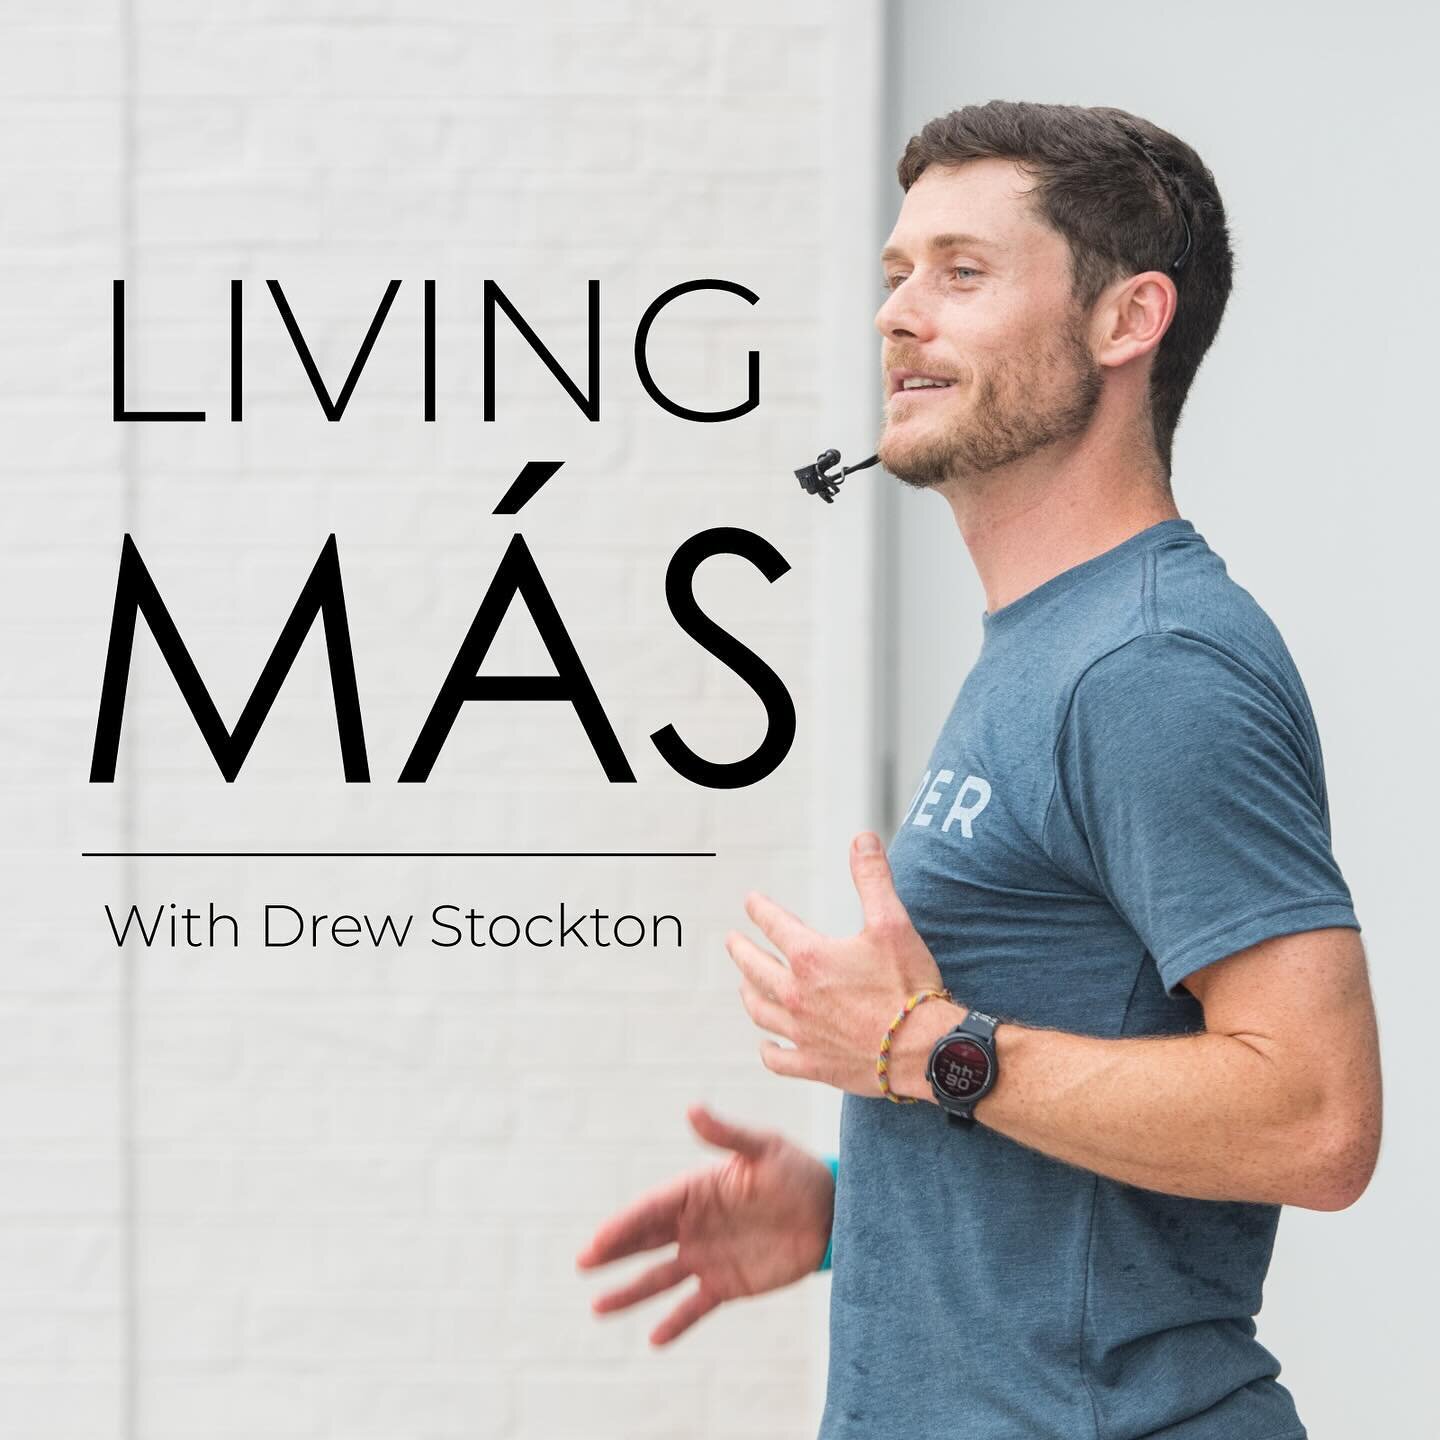 🚨🚨 Welcome to the Living M&Aacute;S Podcast 🚨🚨

I&rsquo;m aware there are quite a few podcasts these days, but if you are reading this, you are somehow connected to my story. 

Maybe its Atlanta, maybe UNC, South America, French alps, Spain&helli